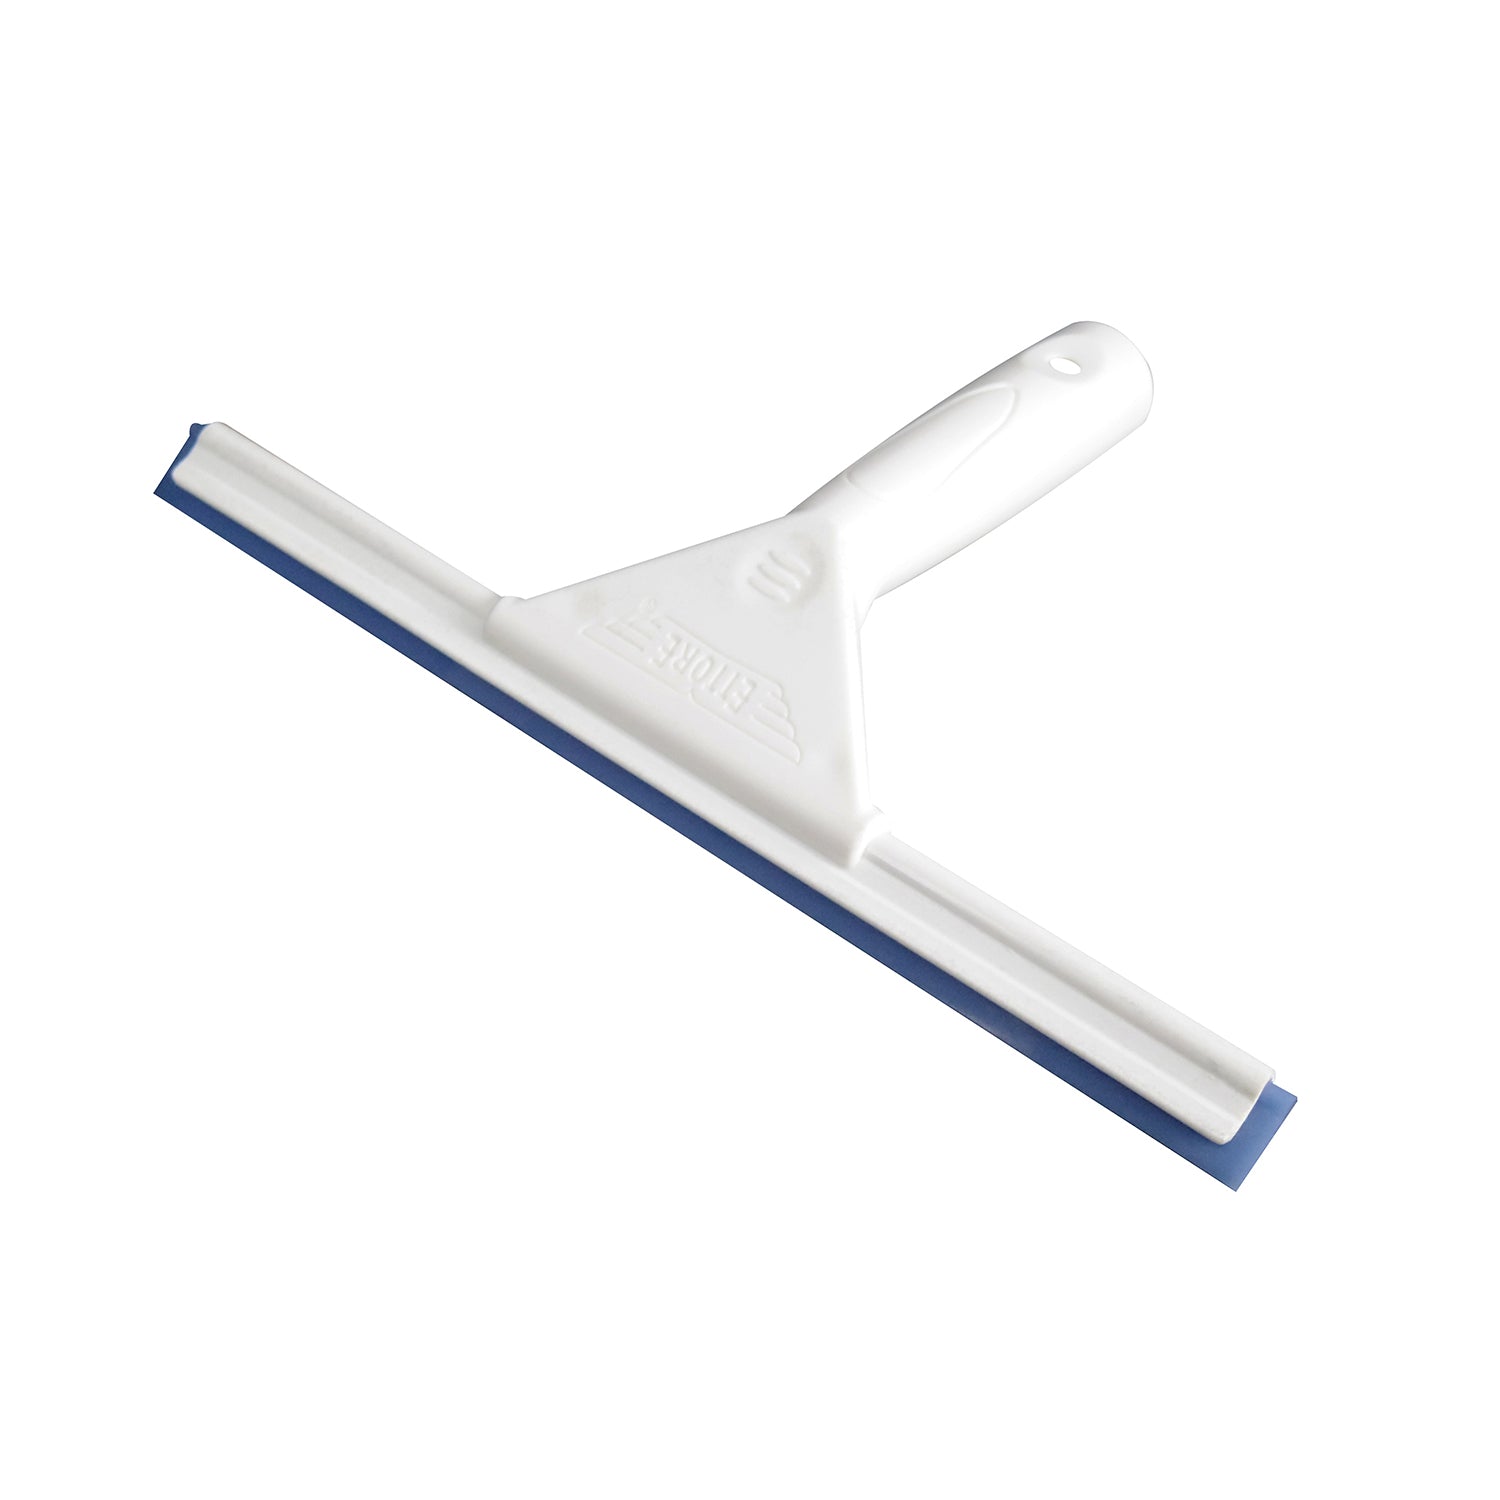 2 Pack Small Silicone Squeegee, Window Shower Squeegee, Auto Water